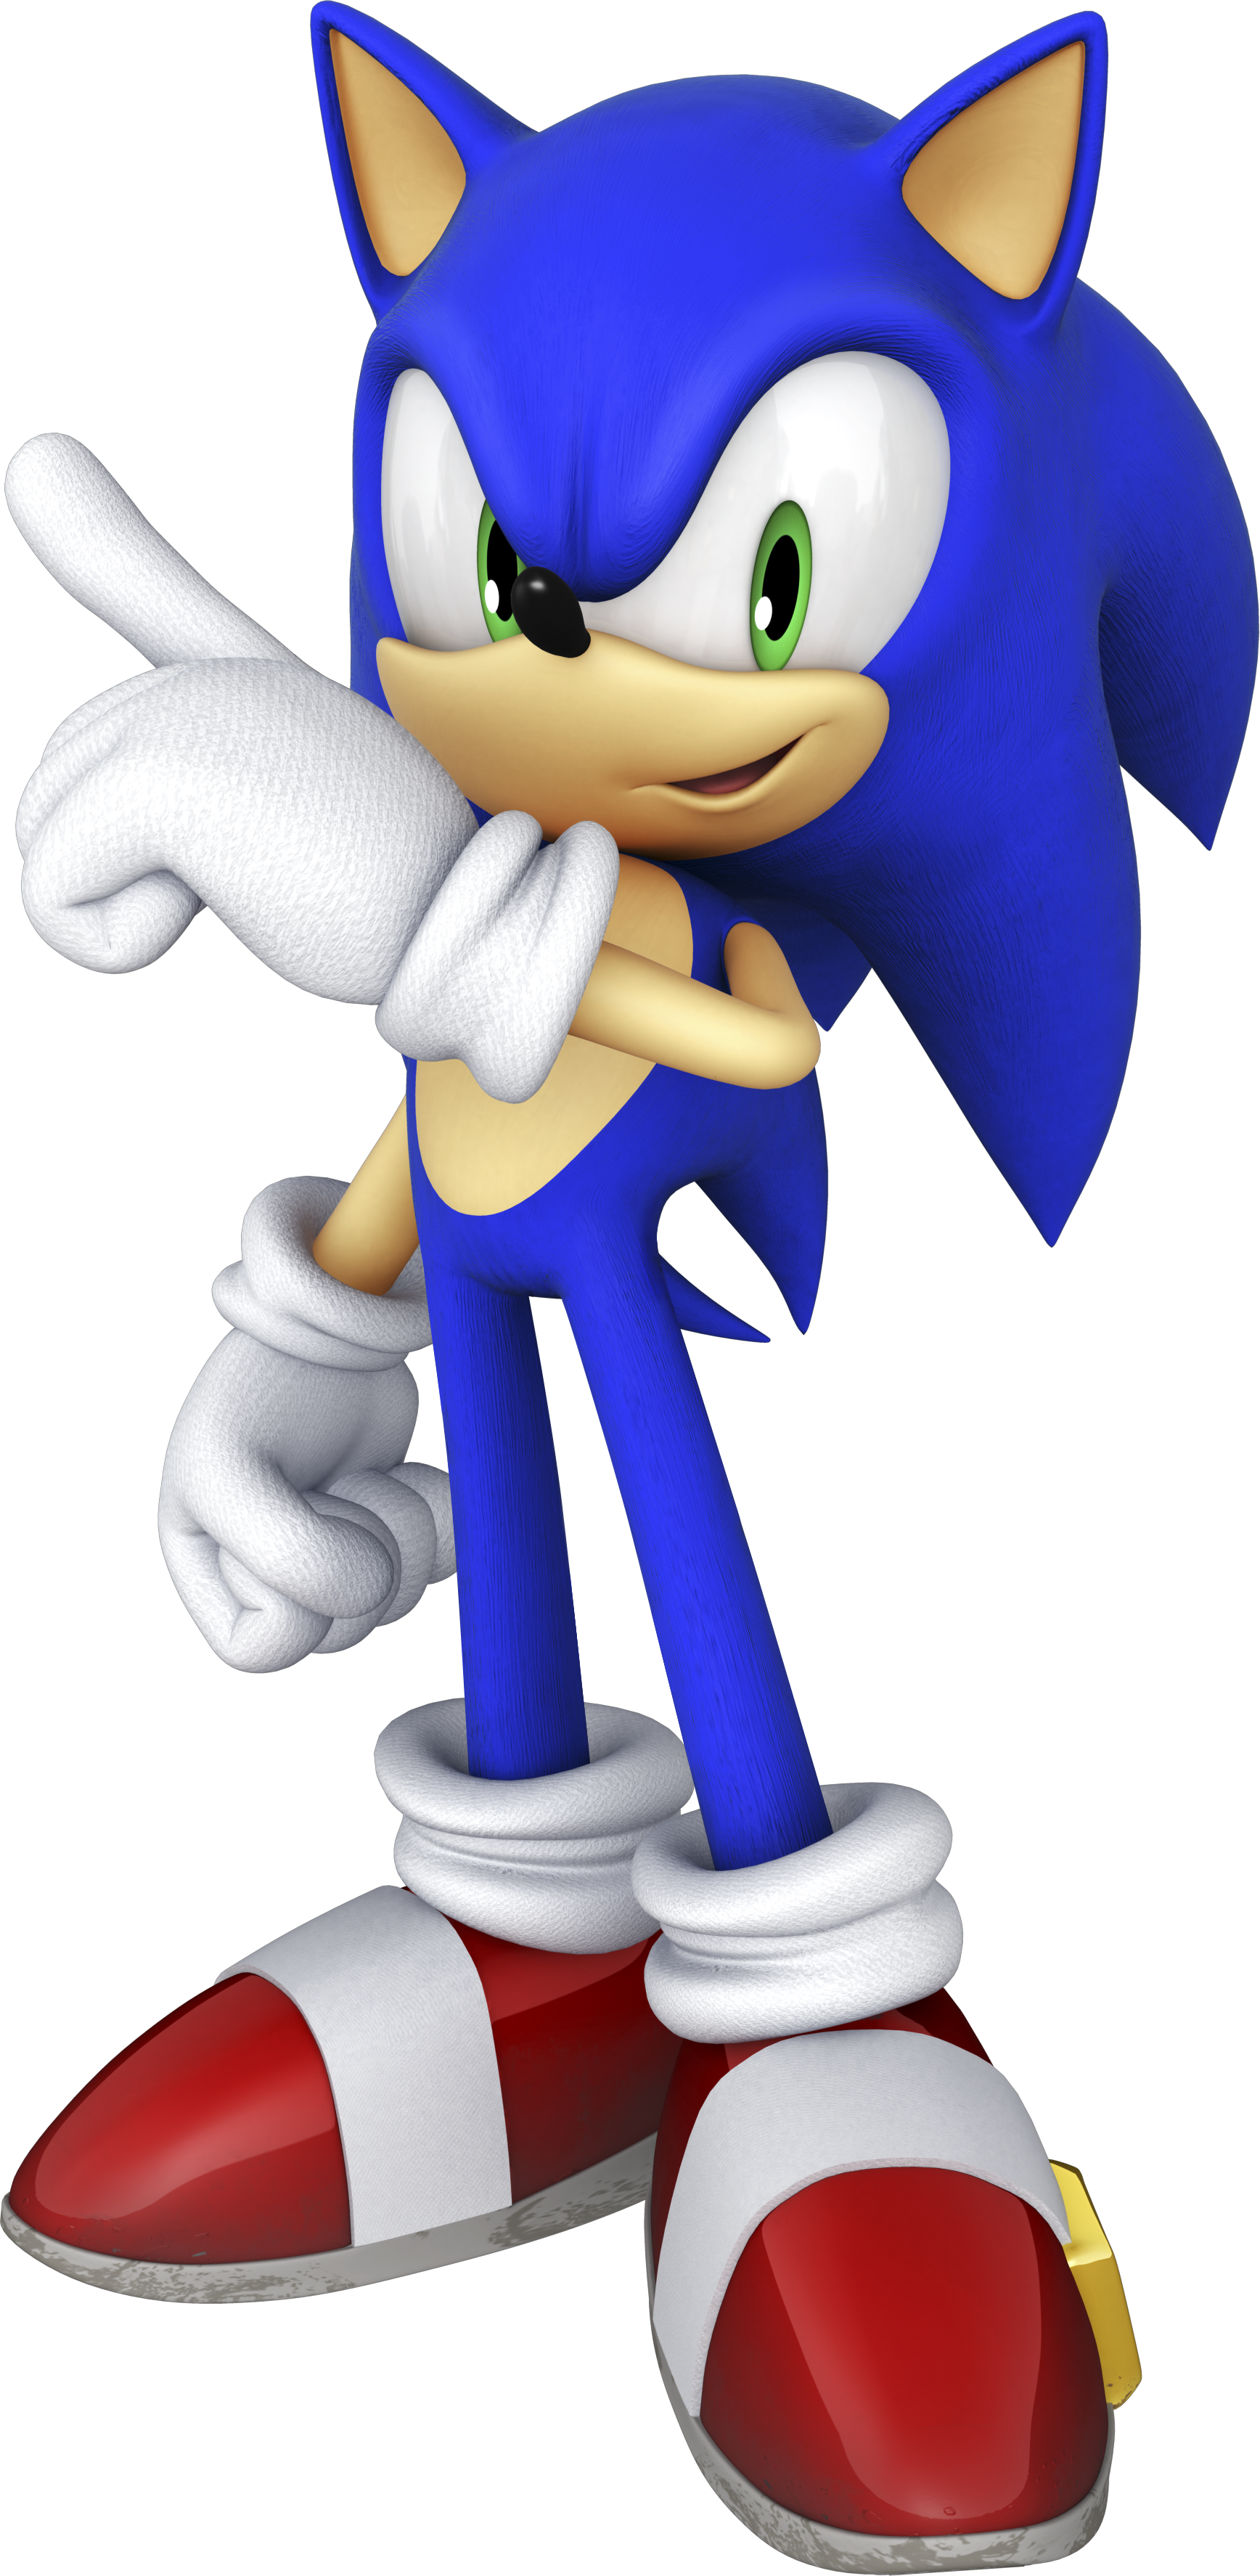 Sonic the hedgehog 2006 game.